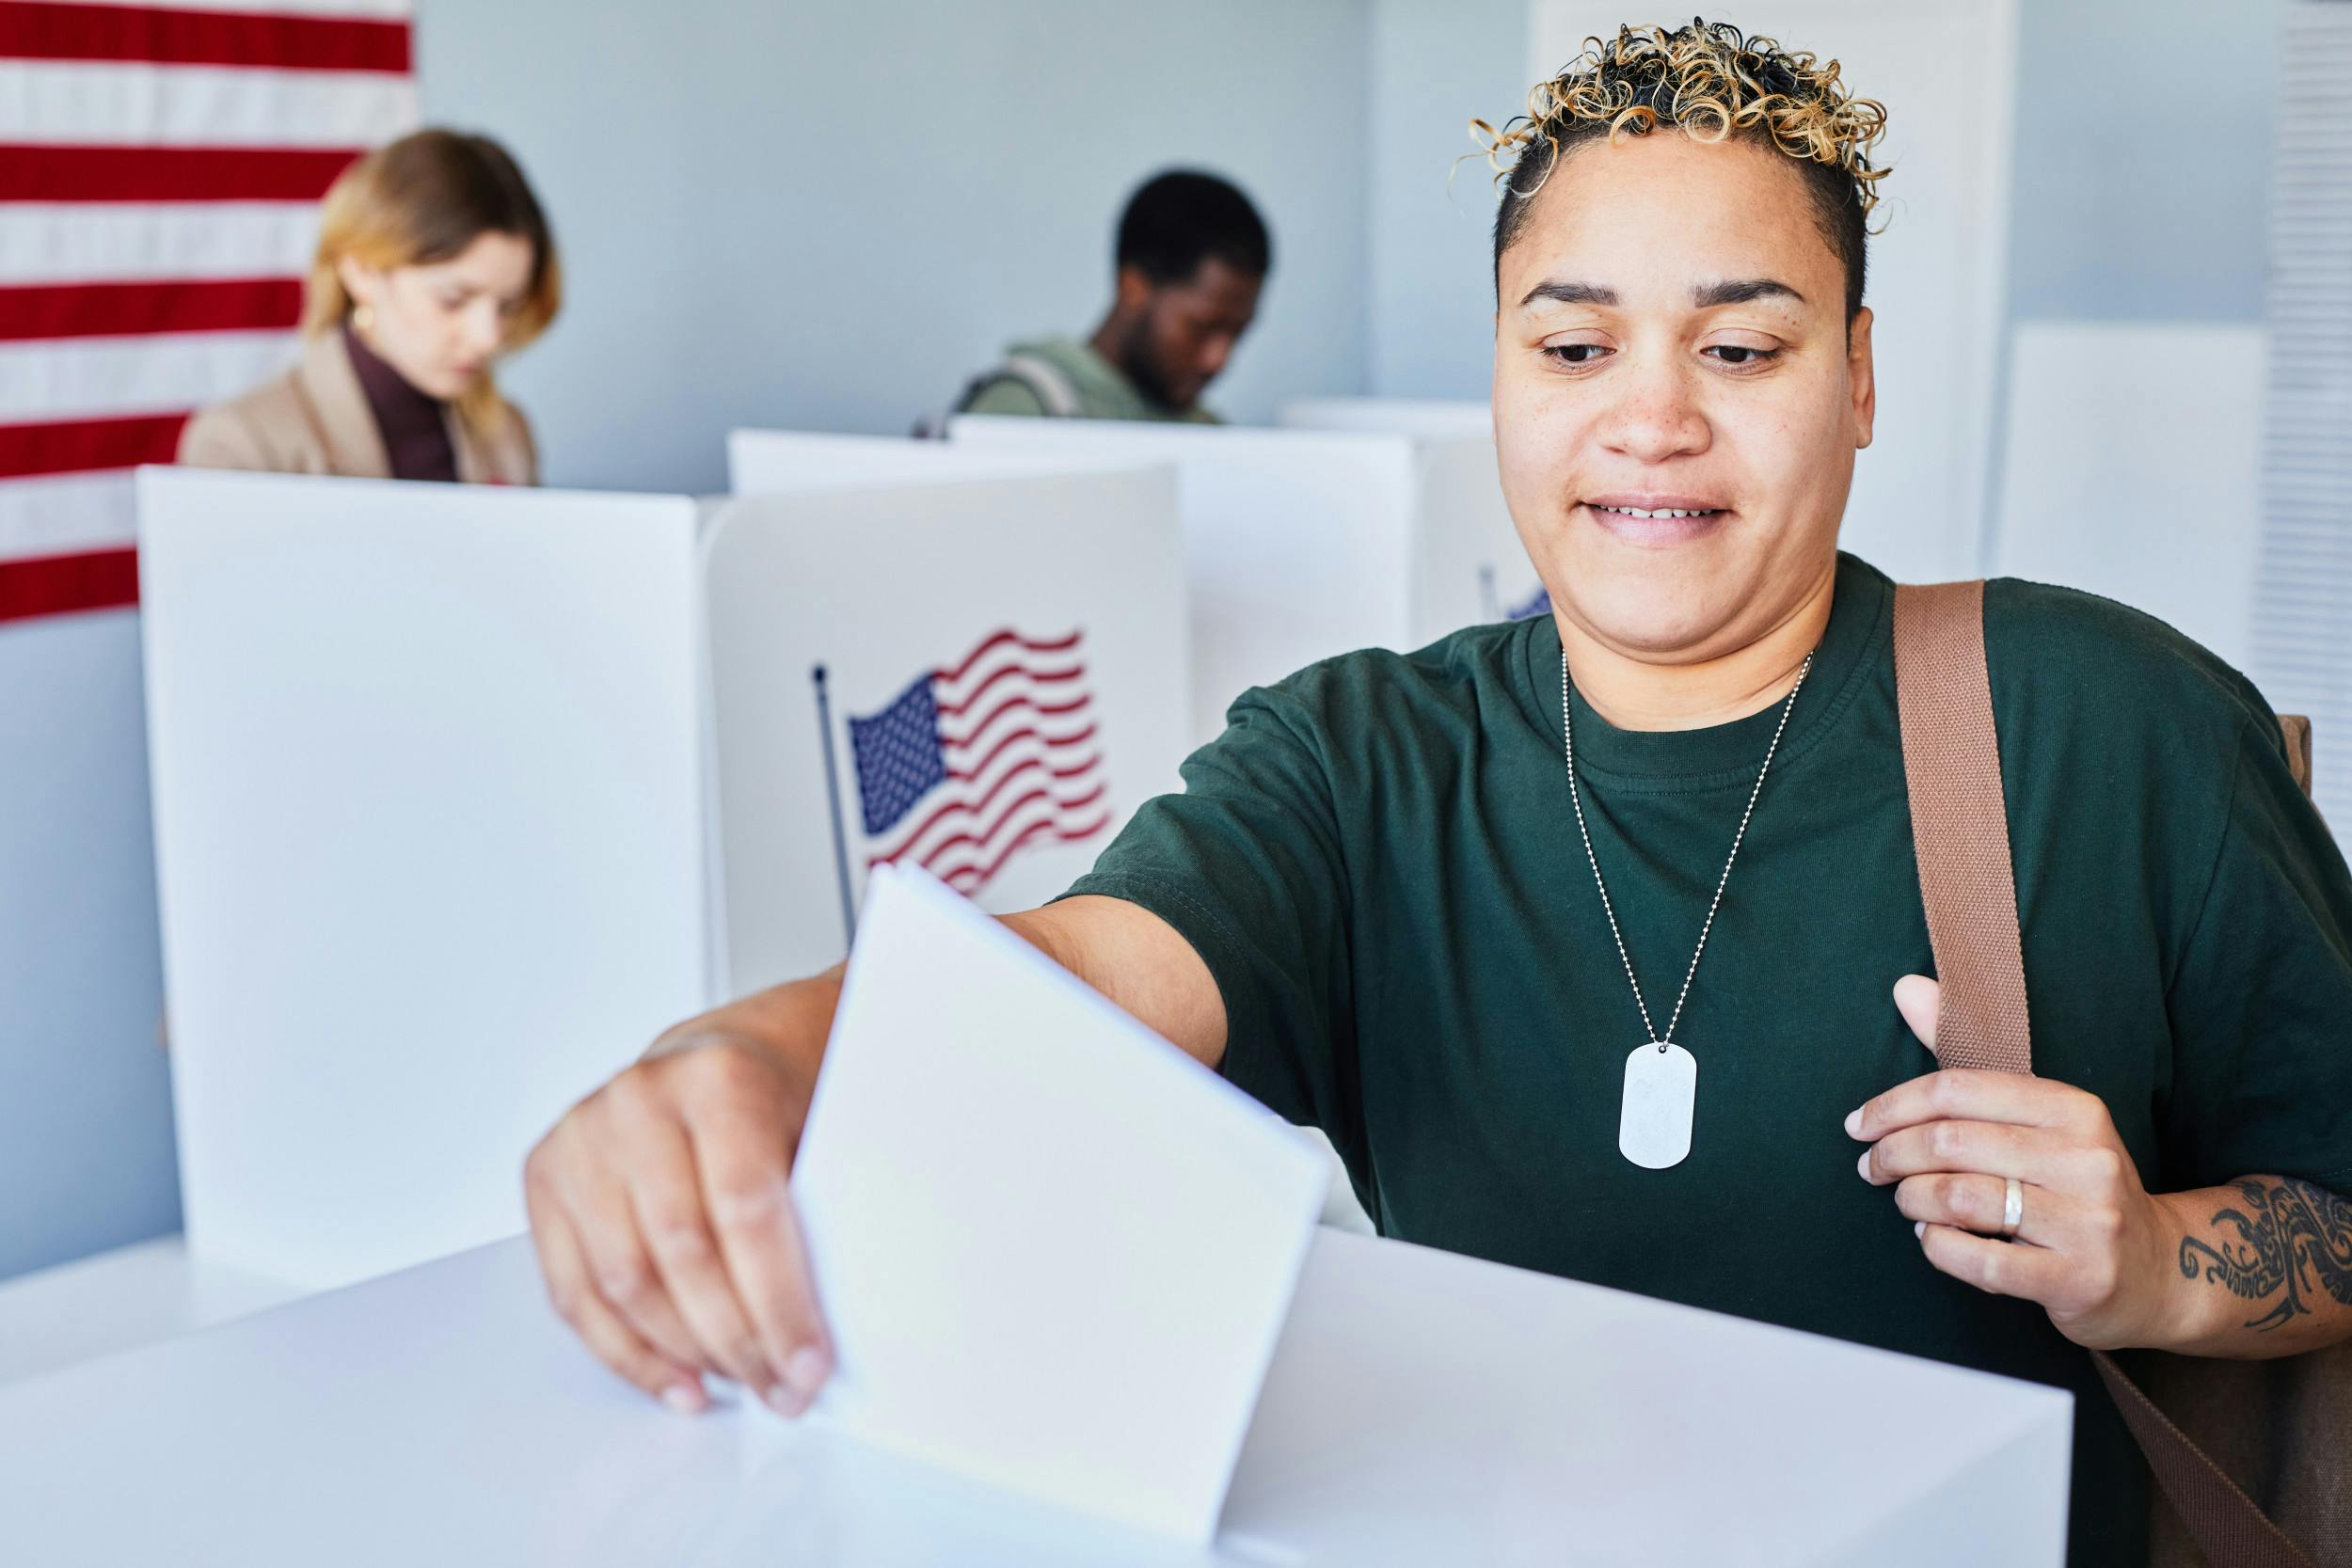 Young Voters Showed Up to Vote for Congress—Will Congress Show Up for Them?